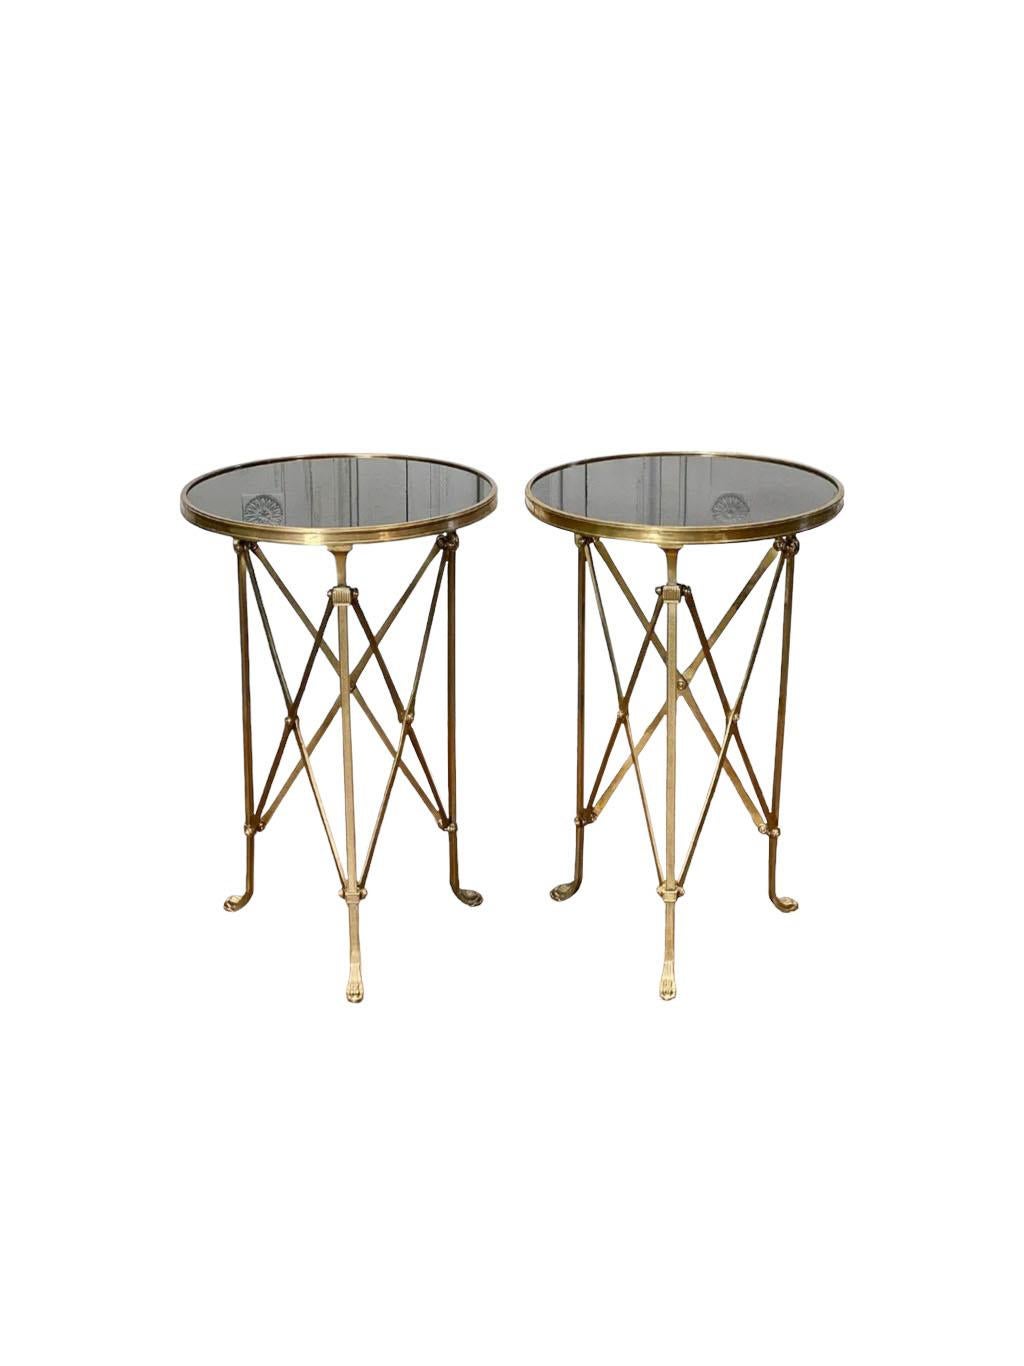 A pair of black granite top empire style Gueridon tables. Brass with paw feet and a circular top.